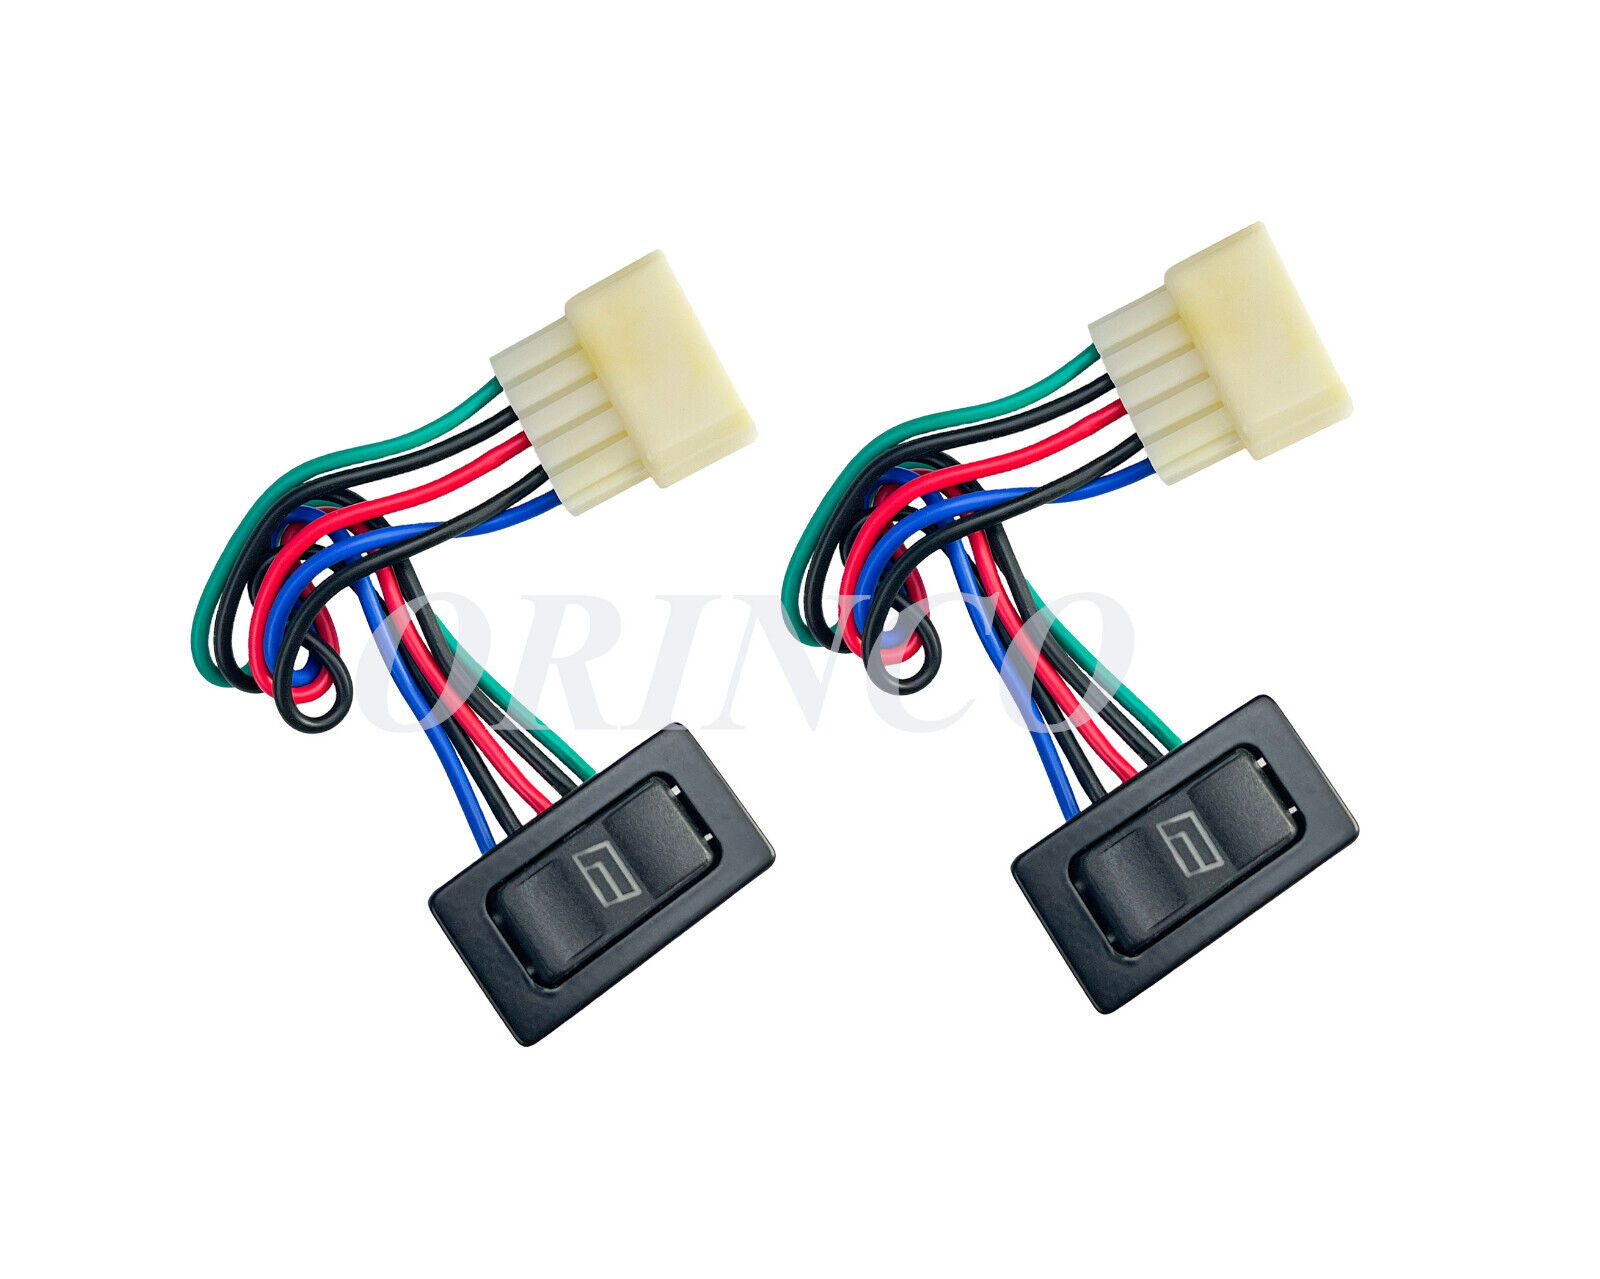 2)  Pre-wired Illuminated Rocker Switch with Socket for Car Power Door/Window